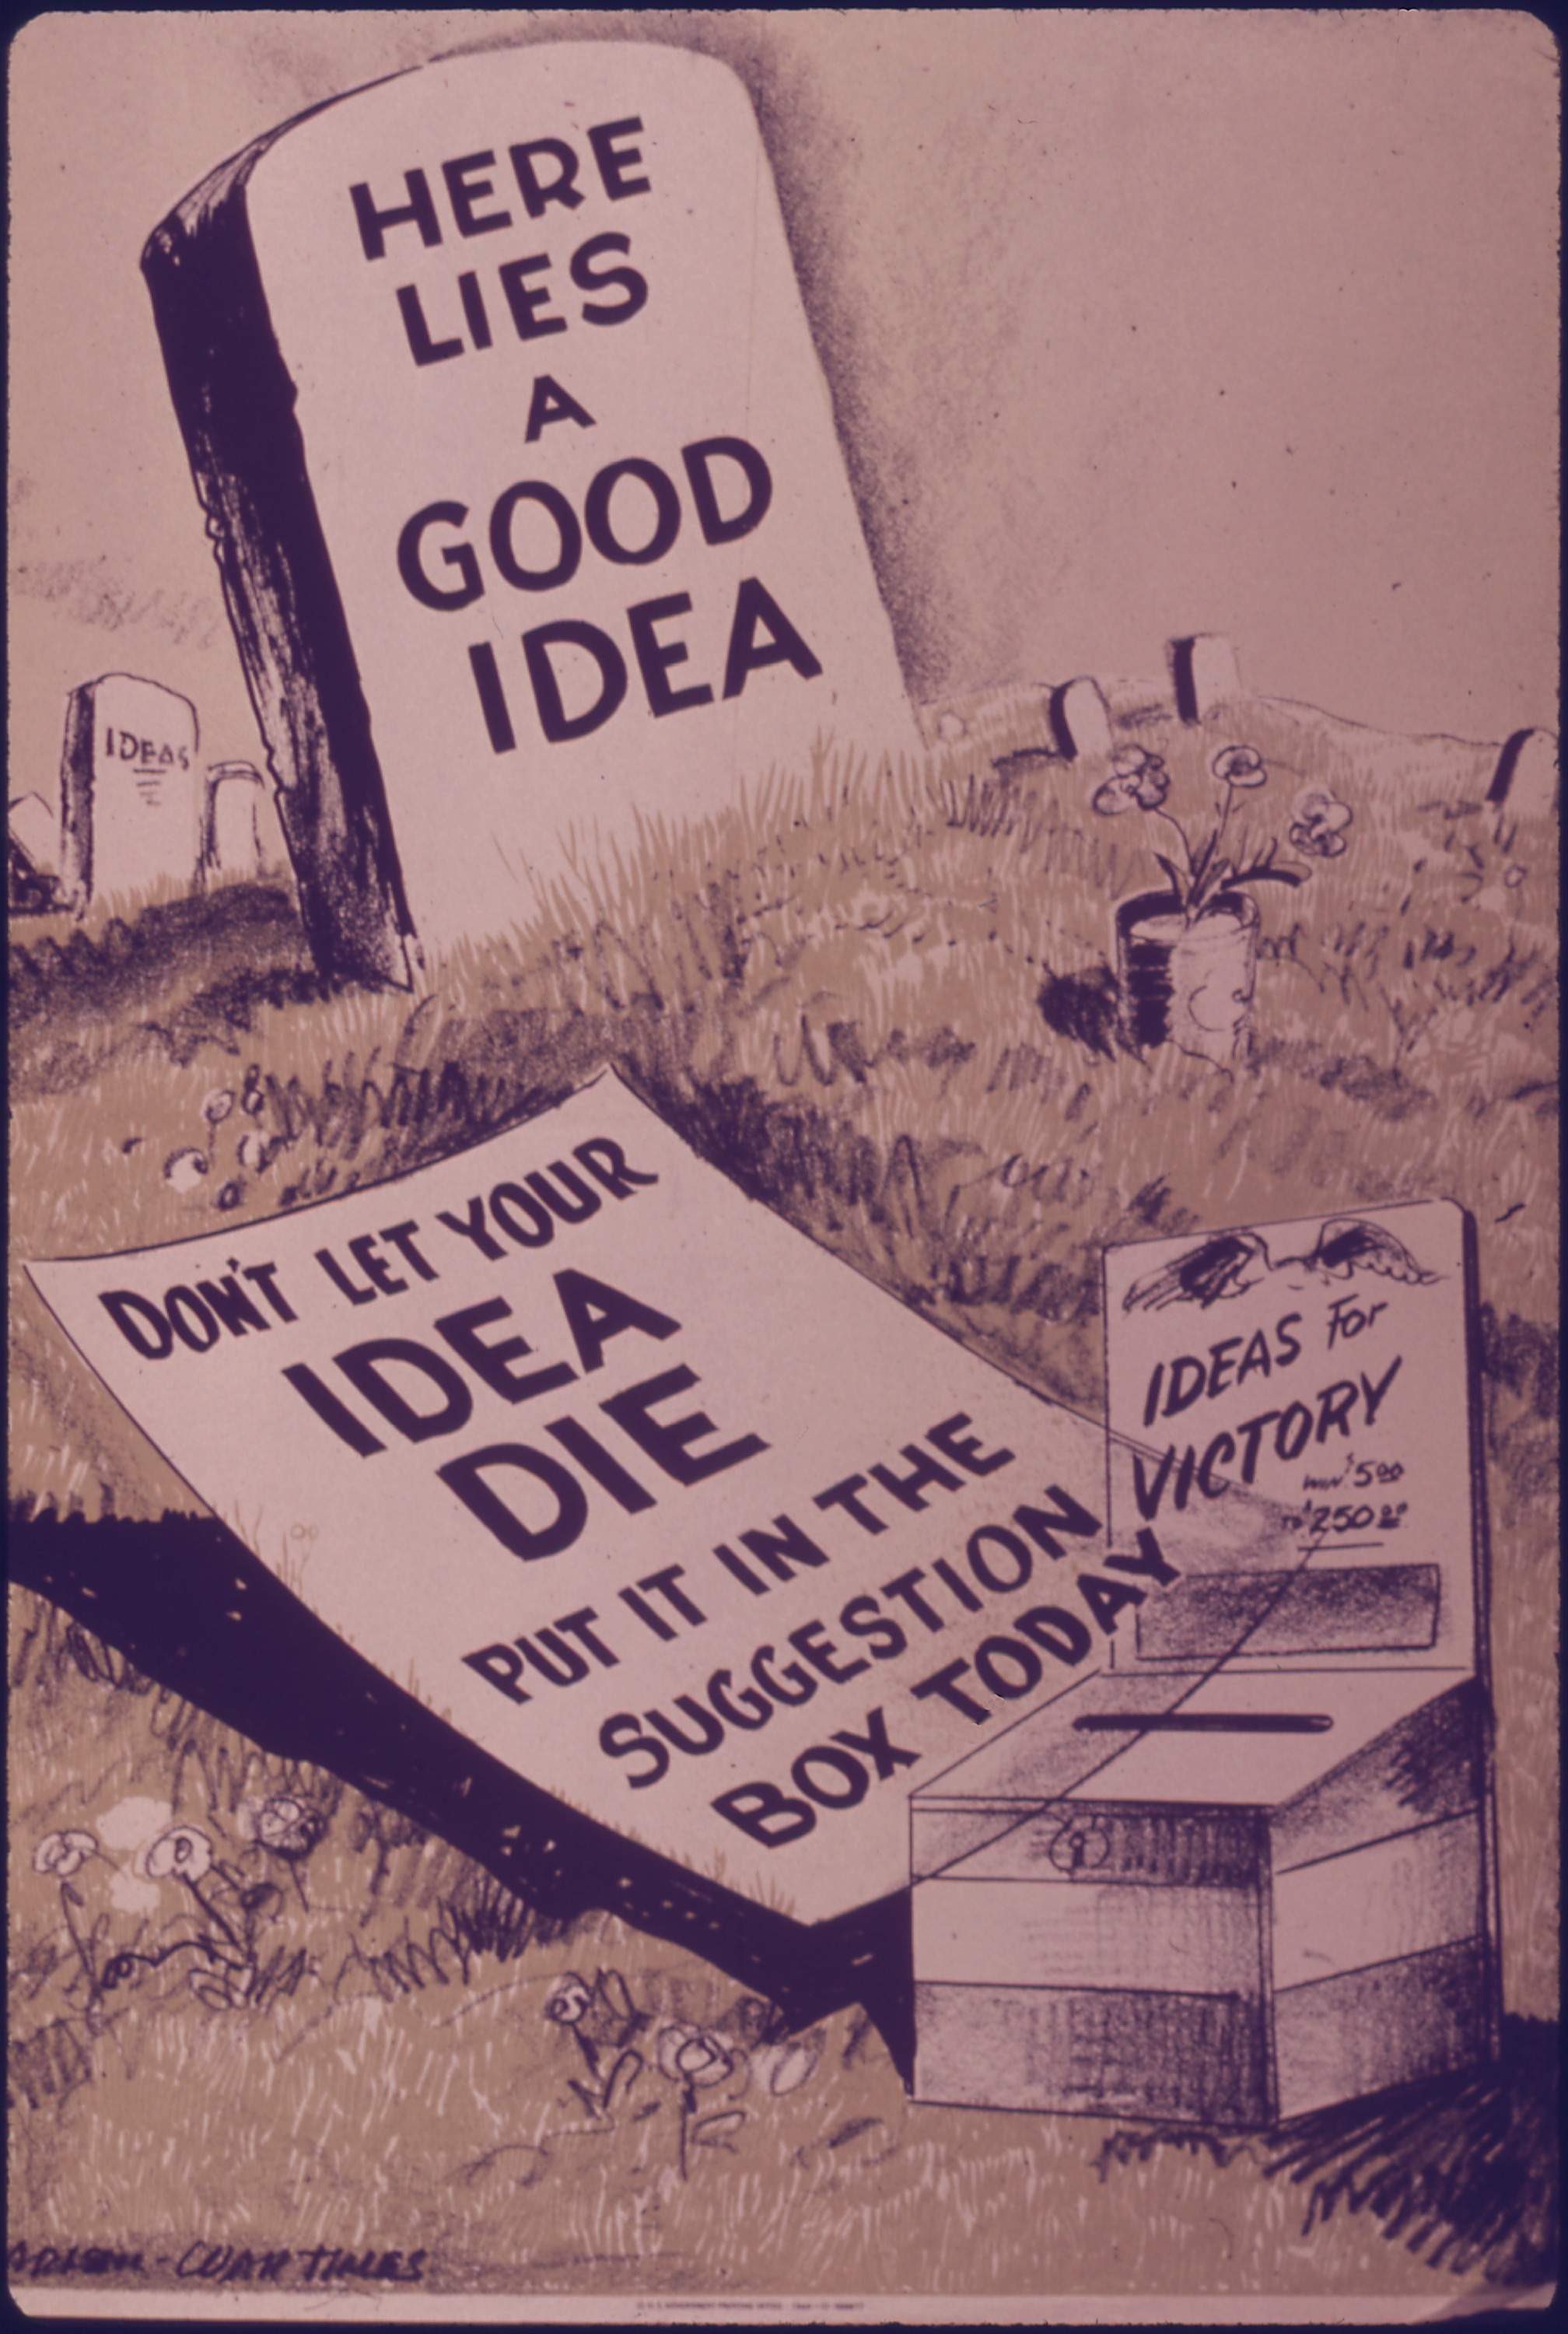 "Here Lies a Good Idea. Don't Let Your Id...